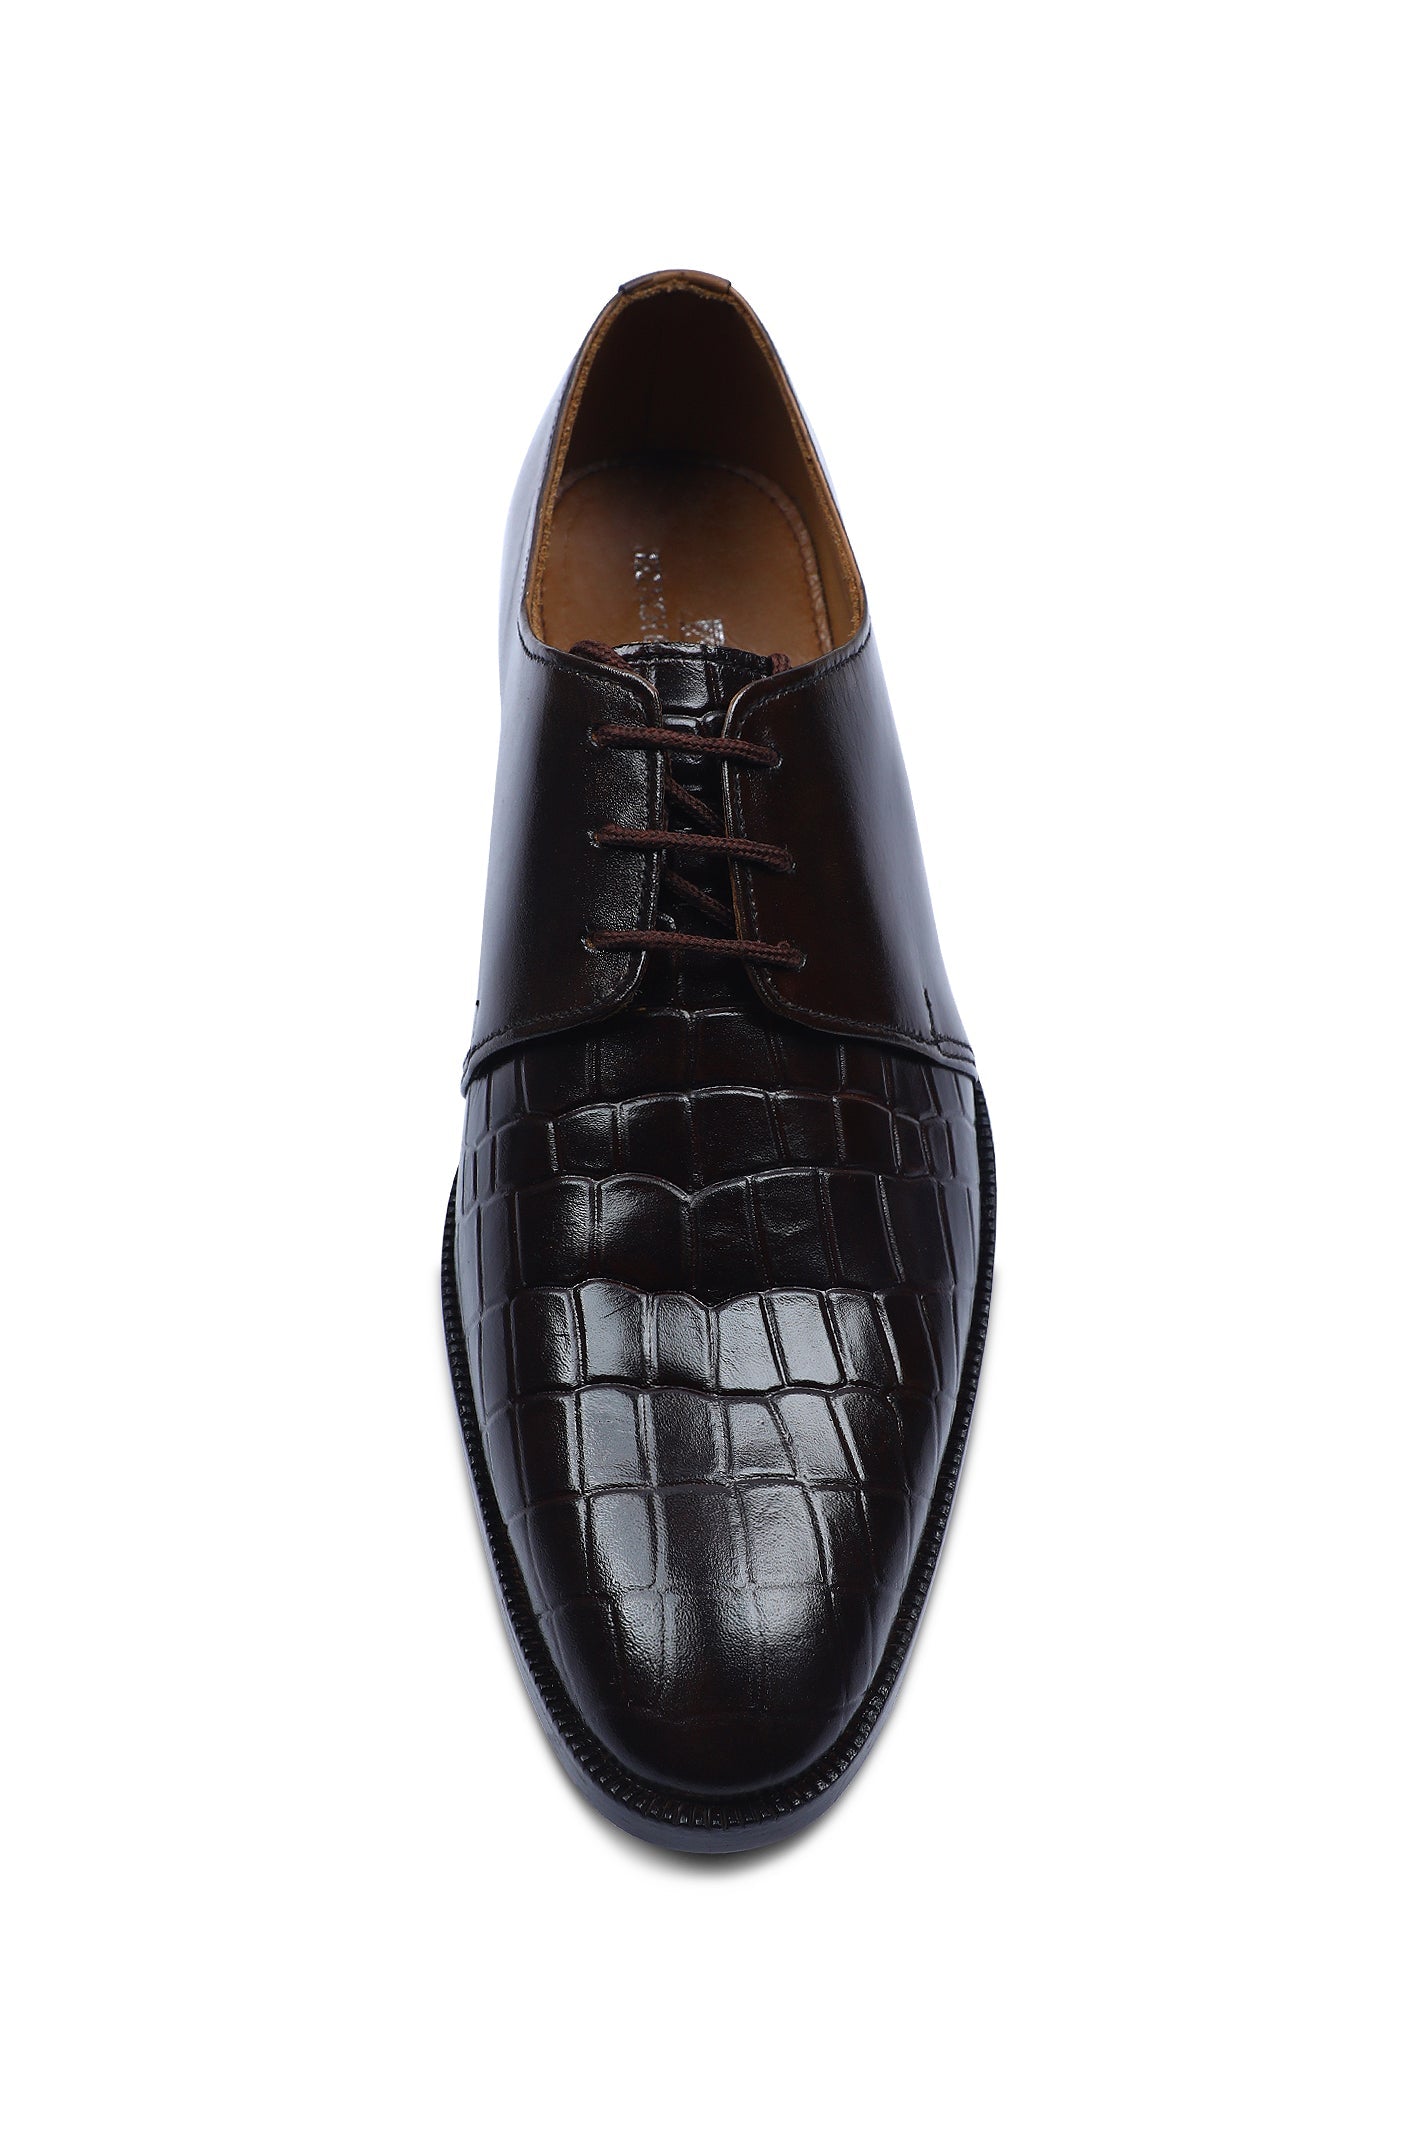 Formal Shoes For Men SKU: SMF-0234-COFFEE - Diners